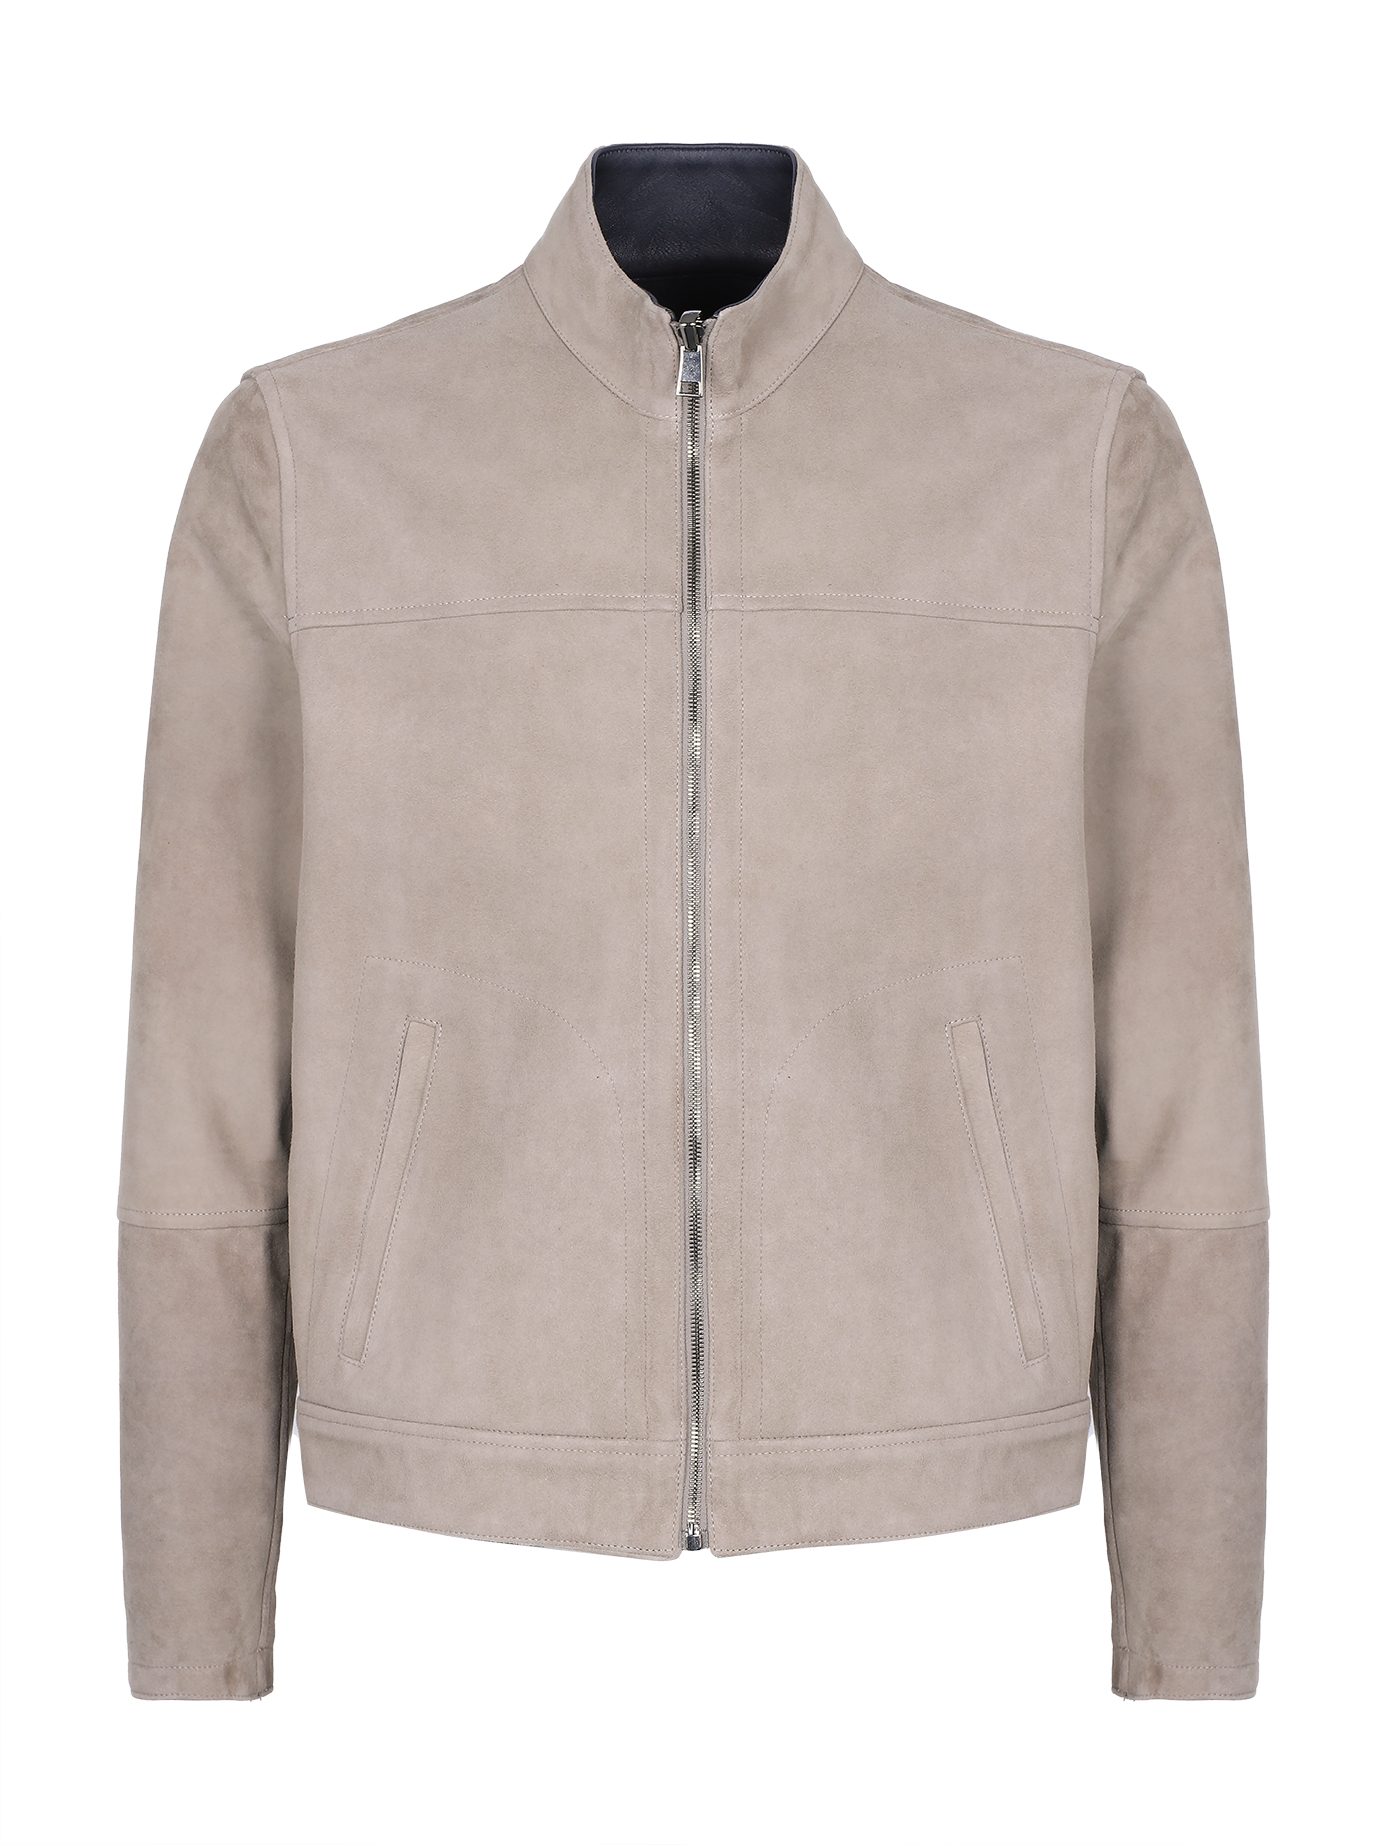 Double-faced Suede Classic Men's Jacket Taupe